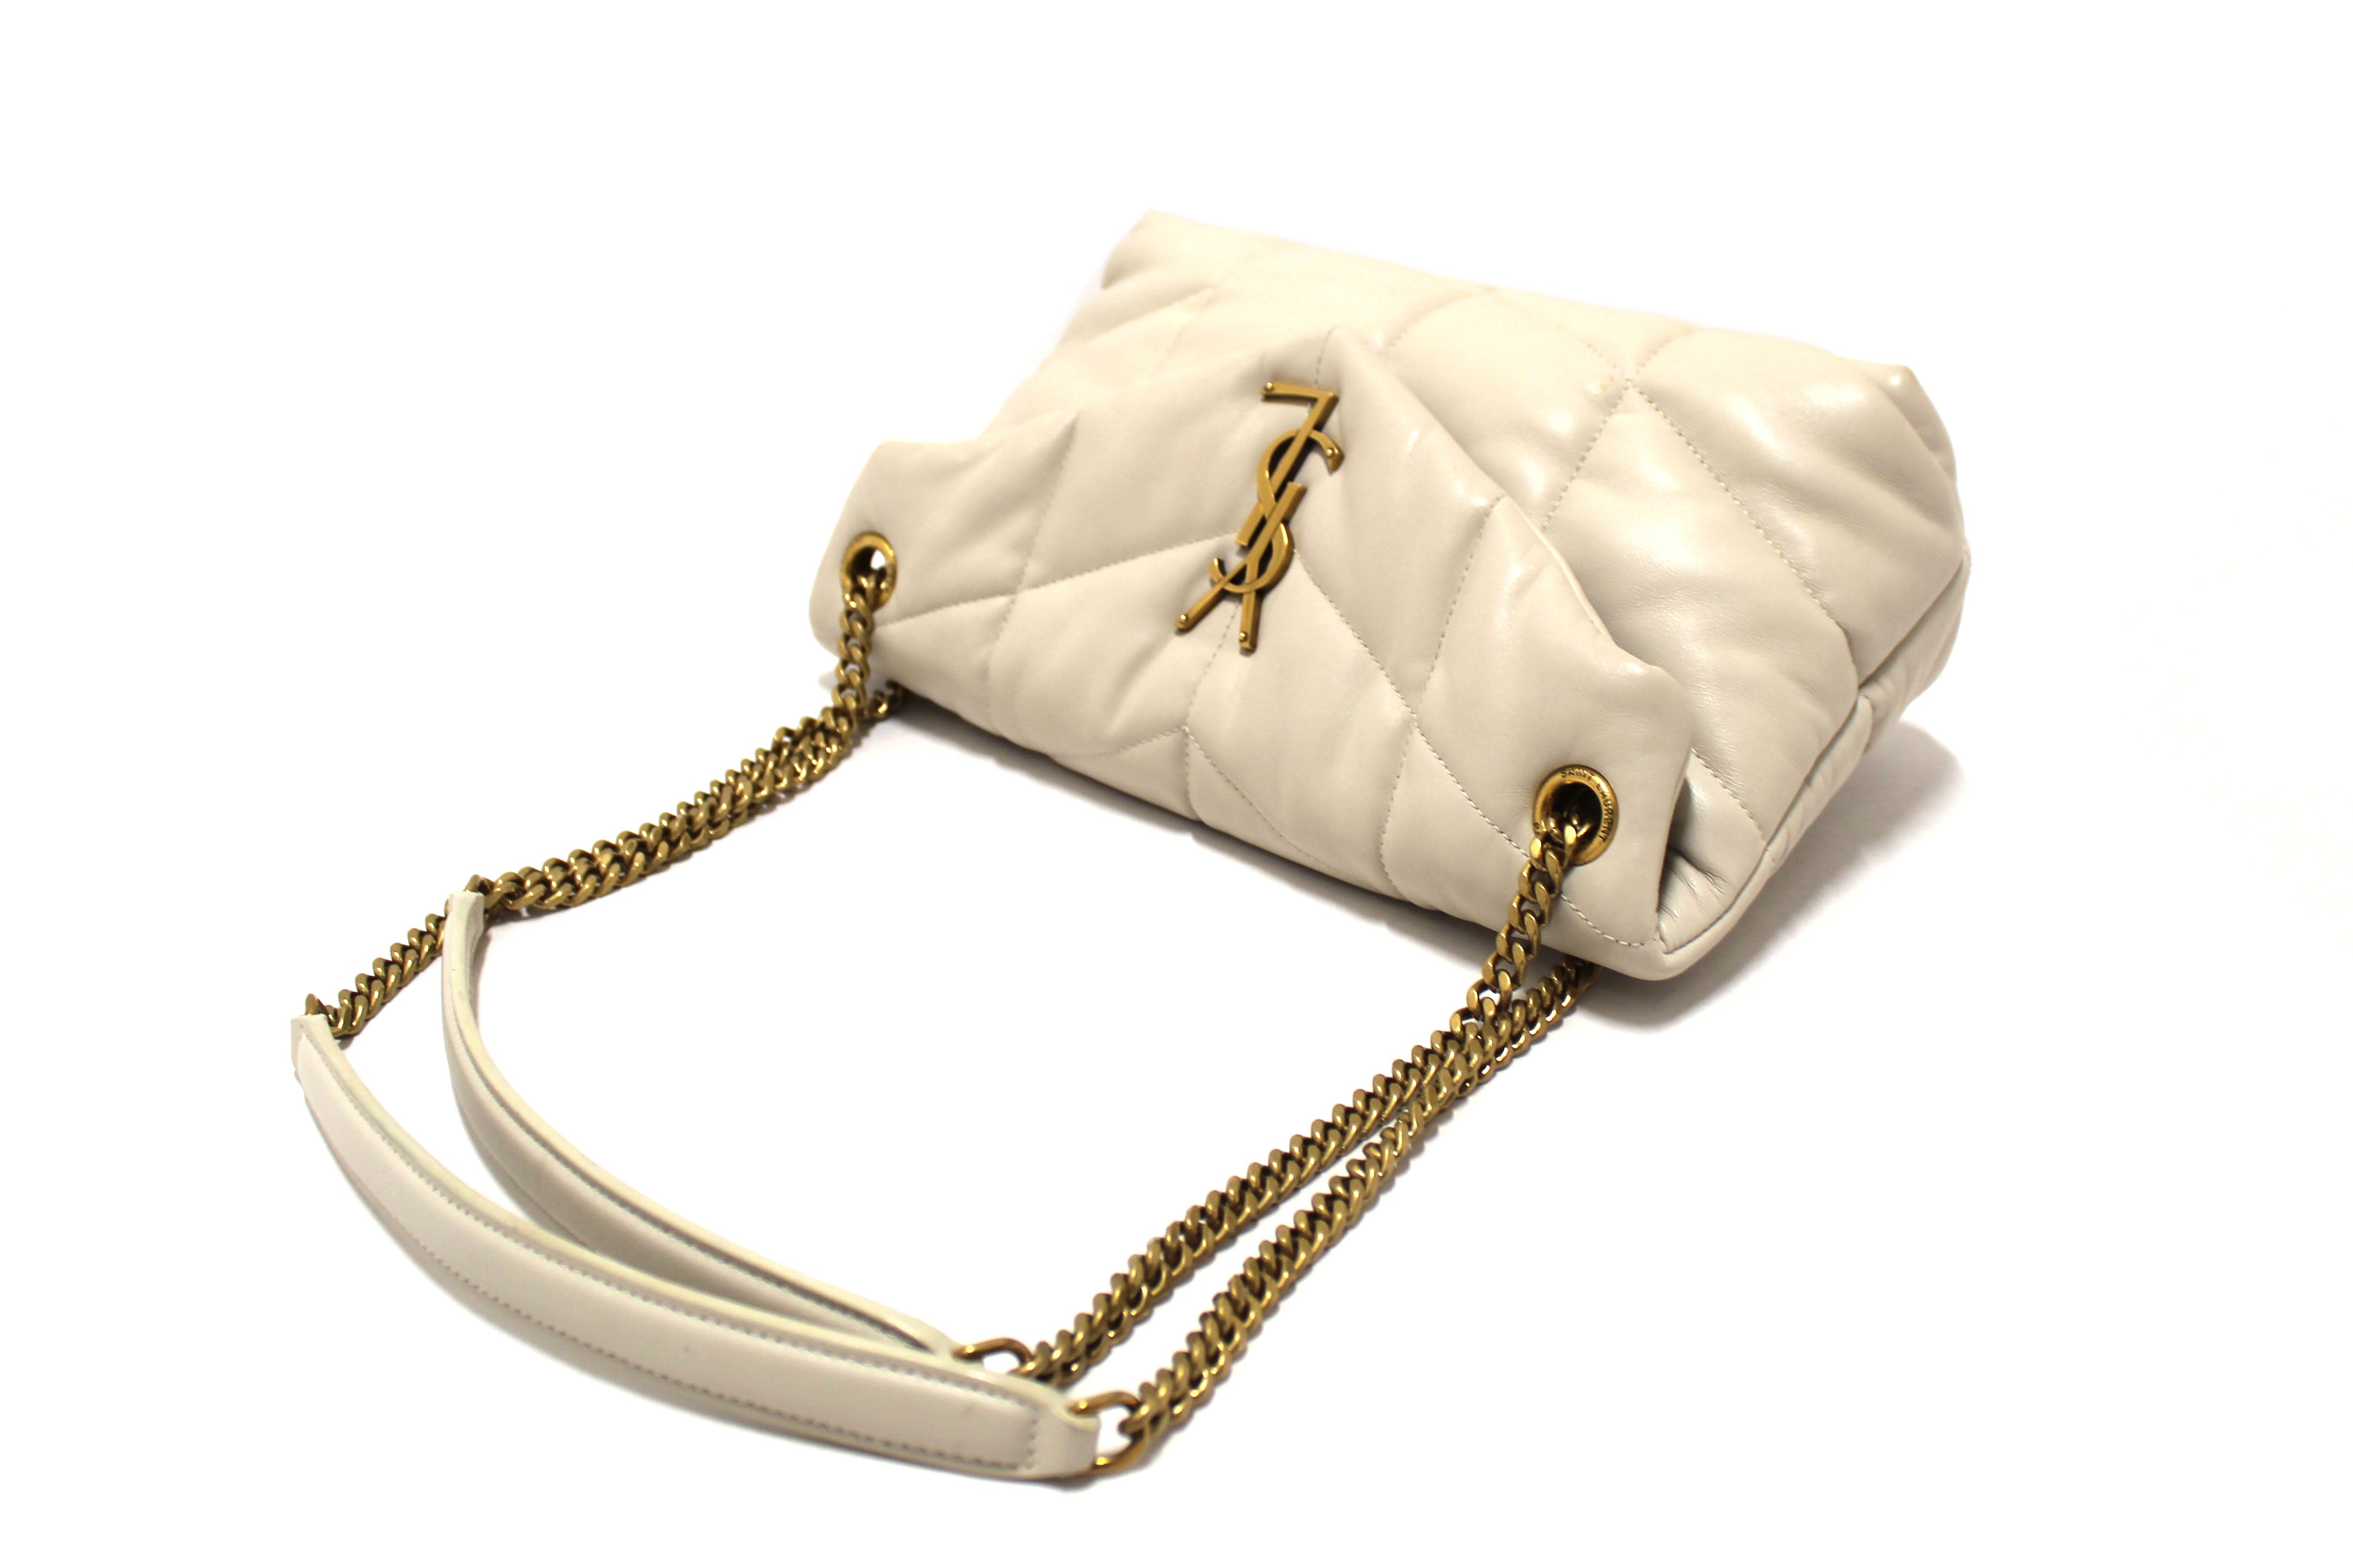 Authentic Yves Saint Laurent White Quilted Lambskin Toy Loulou Puffer Monogram Chain Satchel Bag